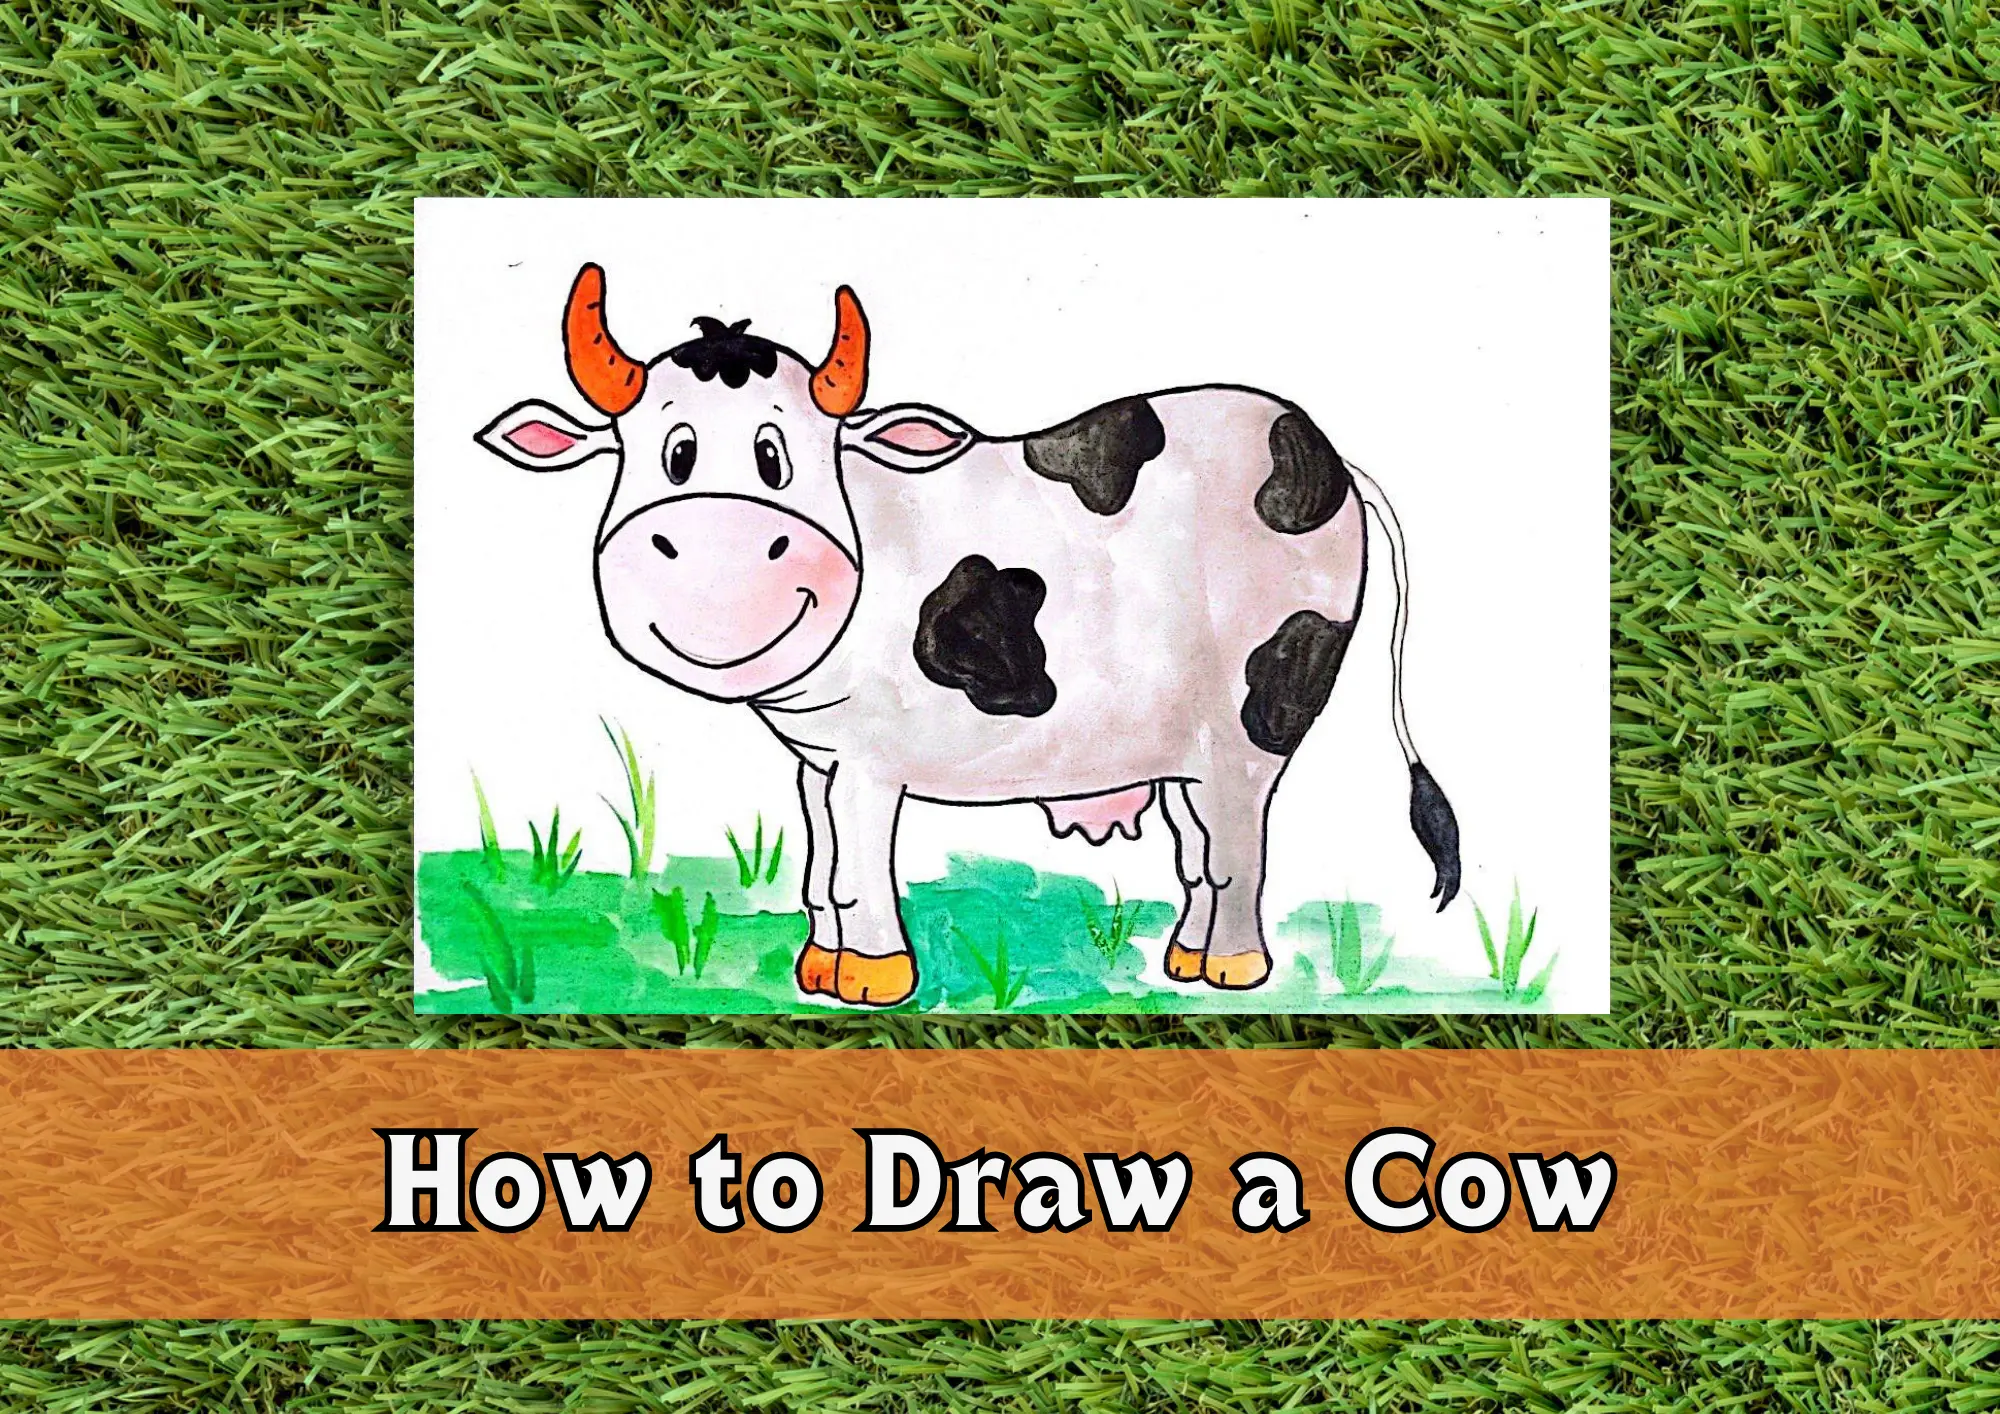 Cow silhouette drawing Royalty Free Vector Image